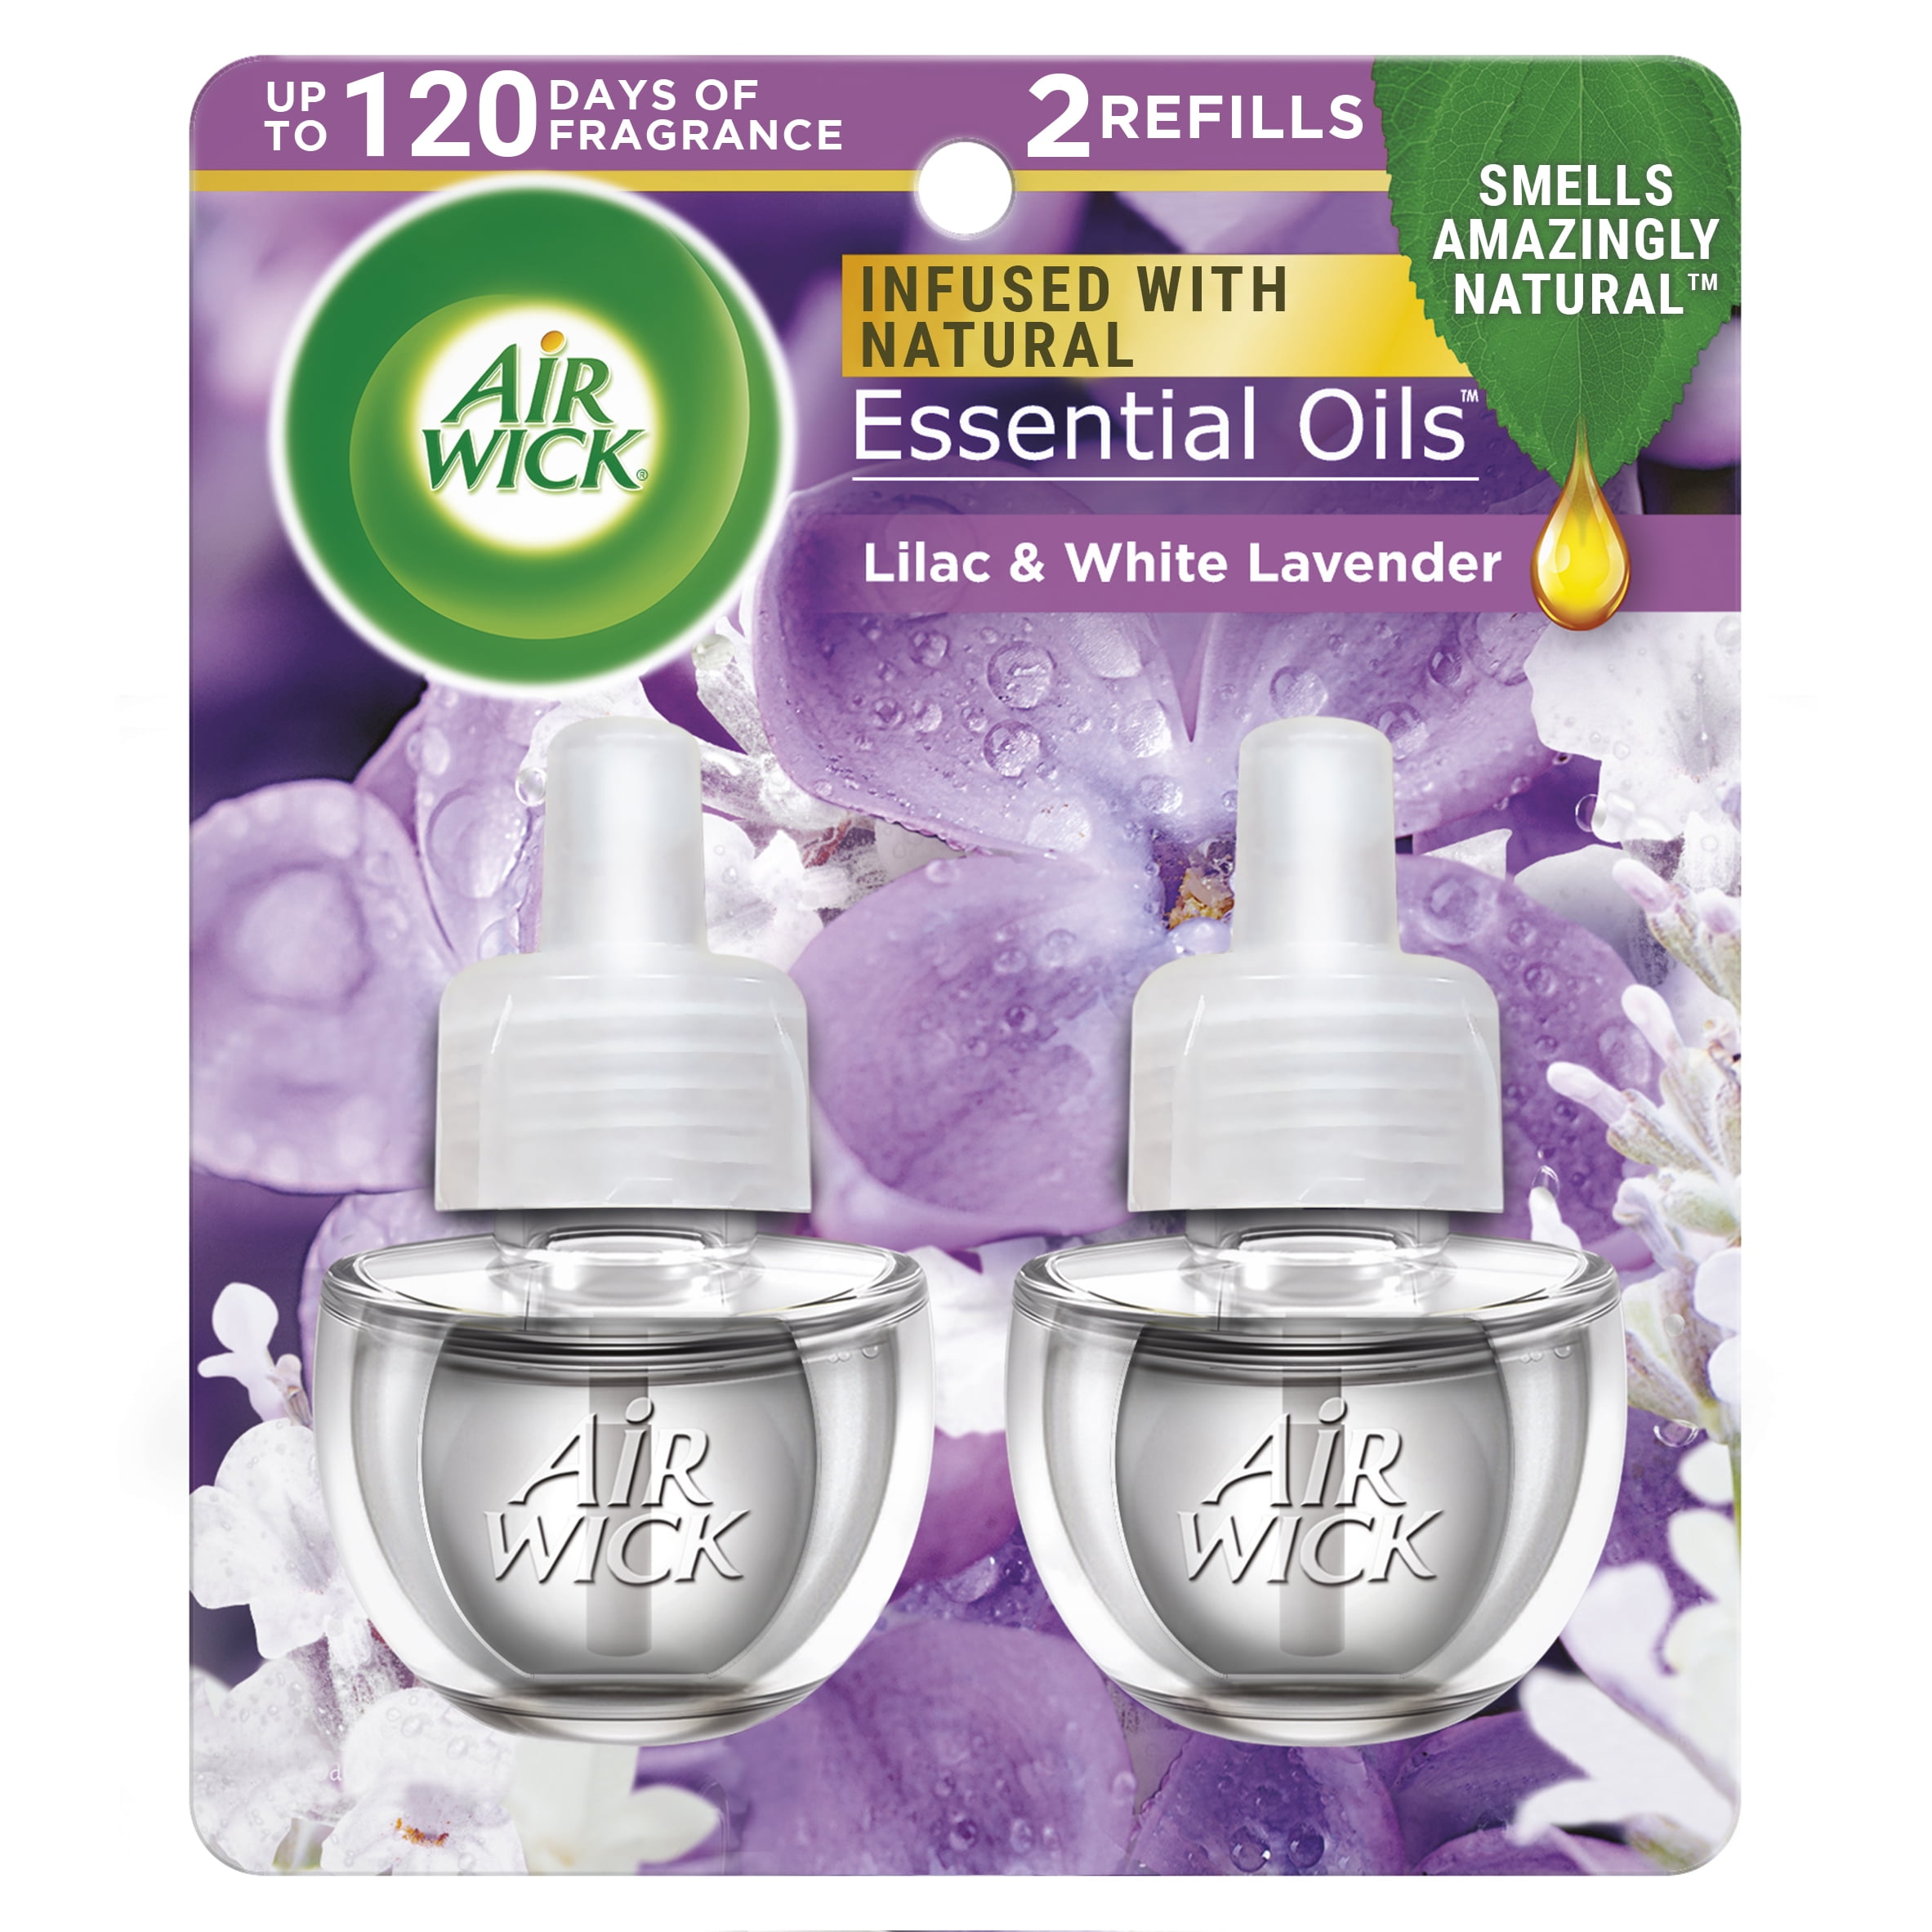  Air Wick Automatic Air Freshener Spray Refill, 2ct, Lavender &  Chamomile, Odor Neutralization, Essential Oils : Health & Household